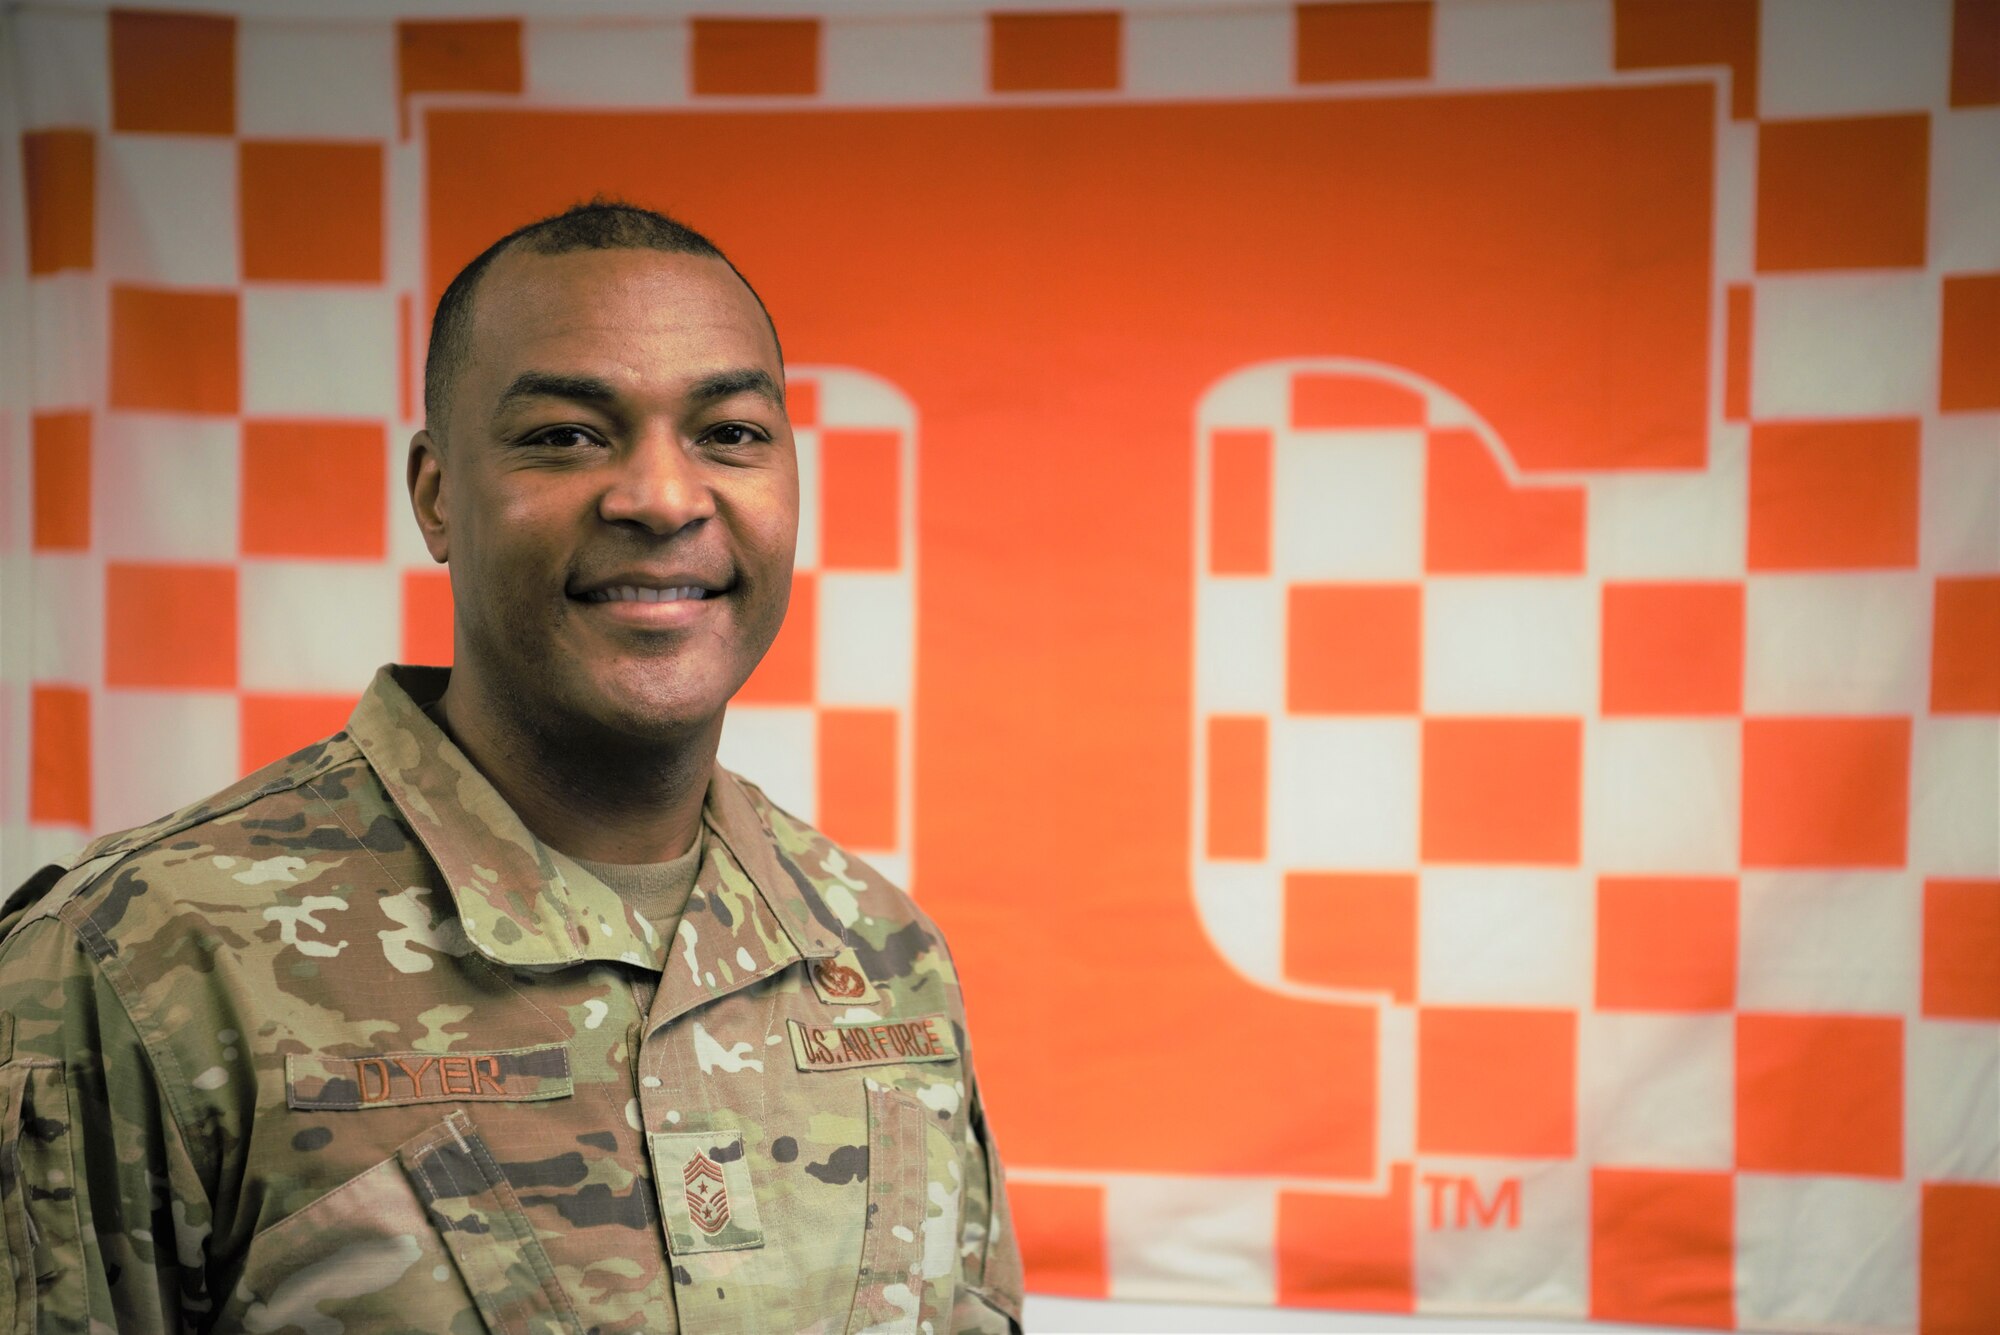 Chief Master Sgt. Alvin R. Dyer, Seventh Air Force command chief, poses for a photo on Osan Air Base, Republic of Korea, December 20, 2021. (U.S. Air Force photo by Master Sgt. Rachelle Morris)